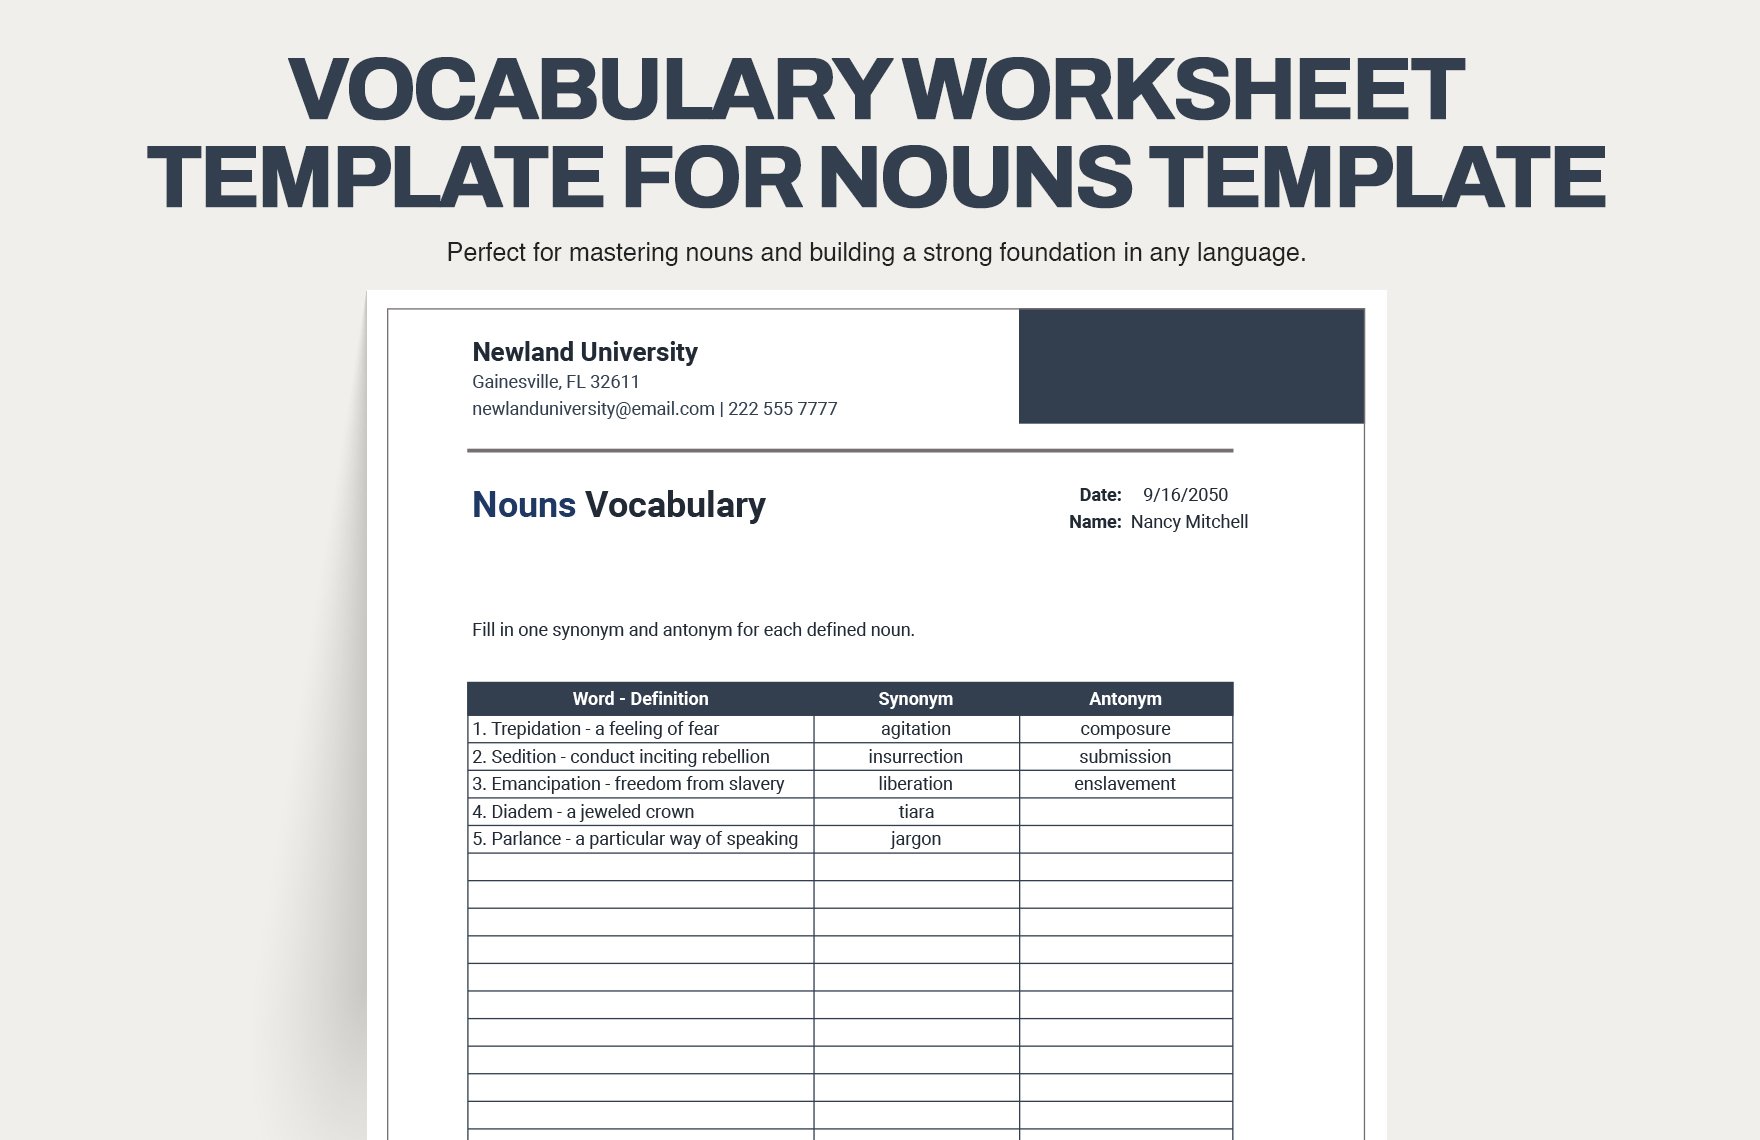 Vocabulary Worksheet Template for Nouns in Excel, Google Sheets